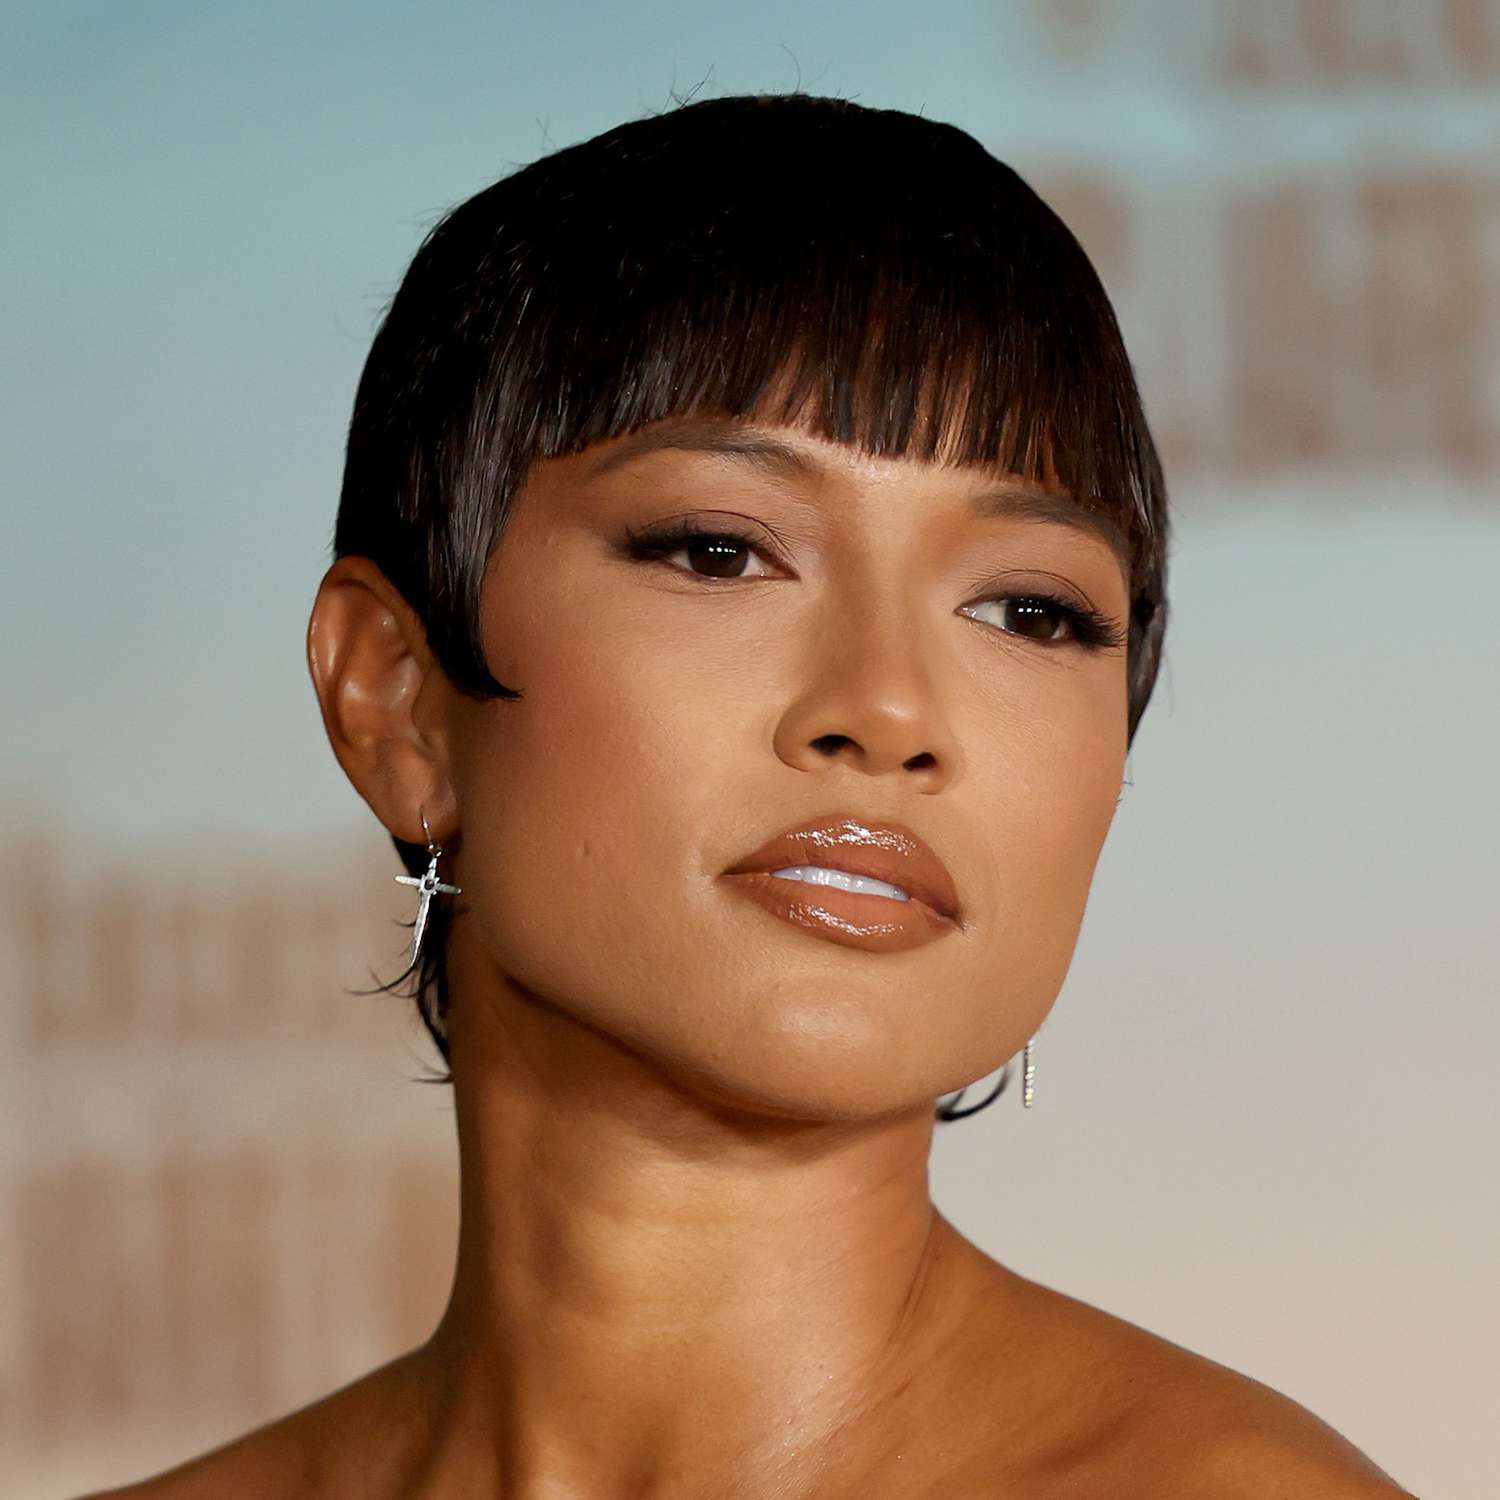 Karrueche Tran attends an event in LA with a sculptural mullet-inspired pixie